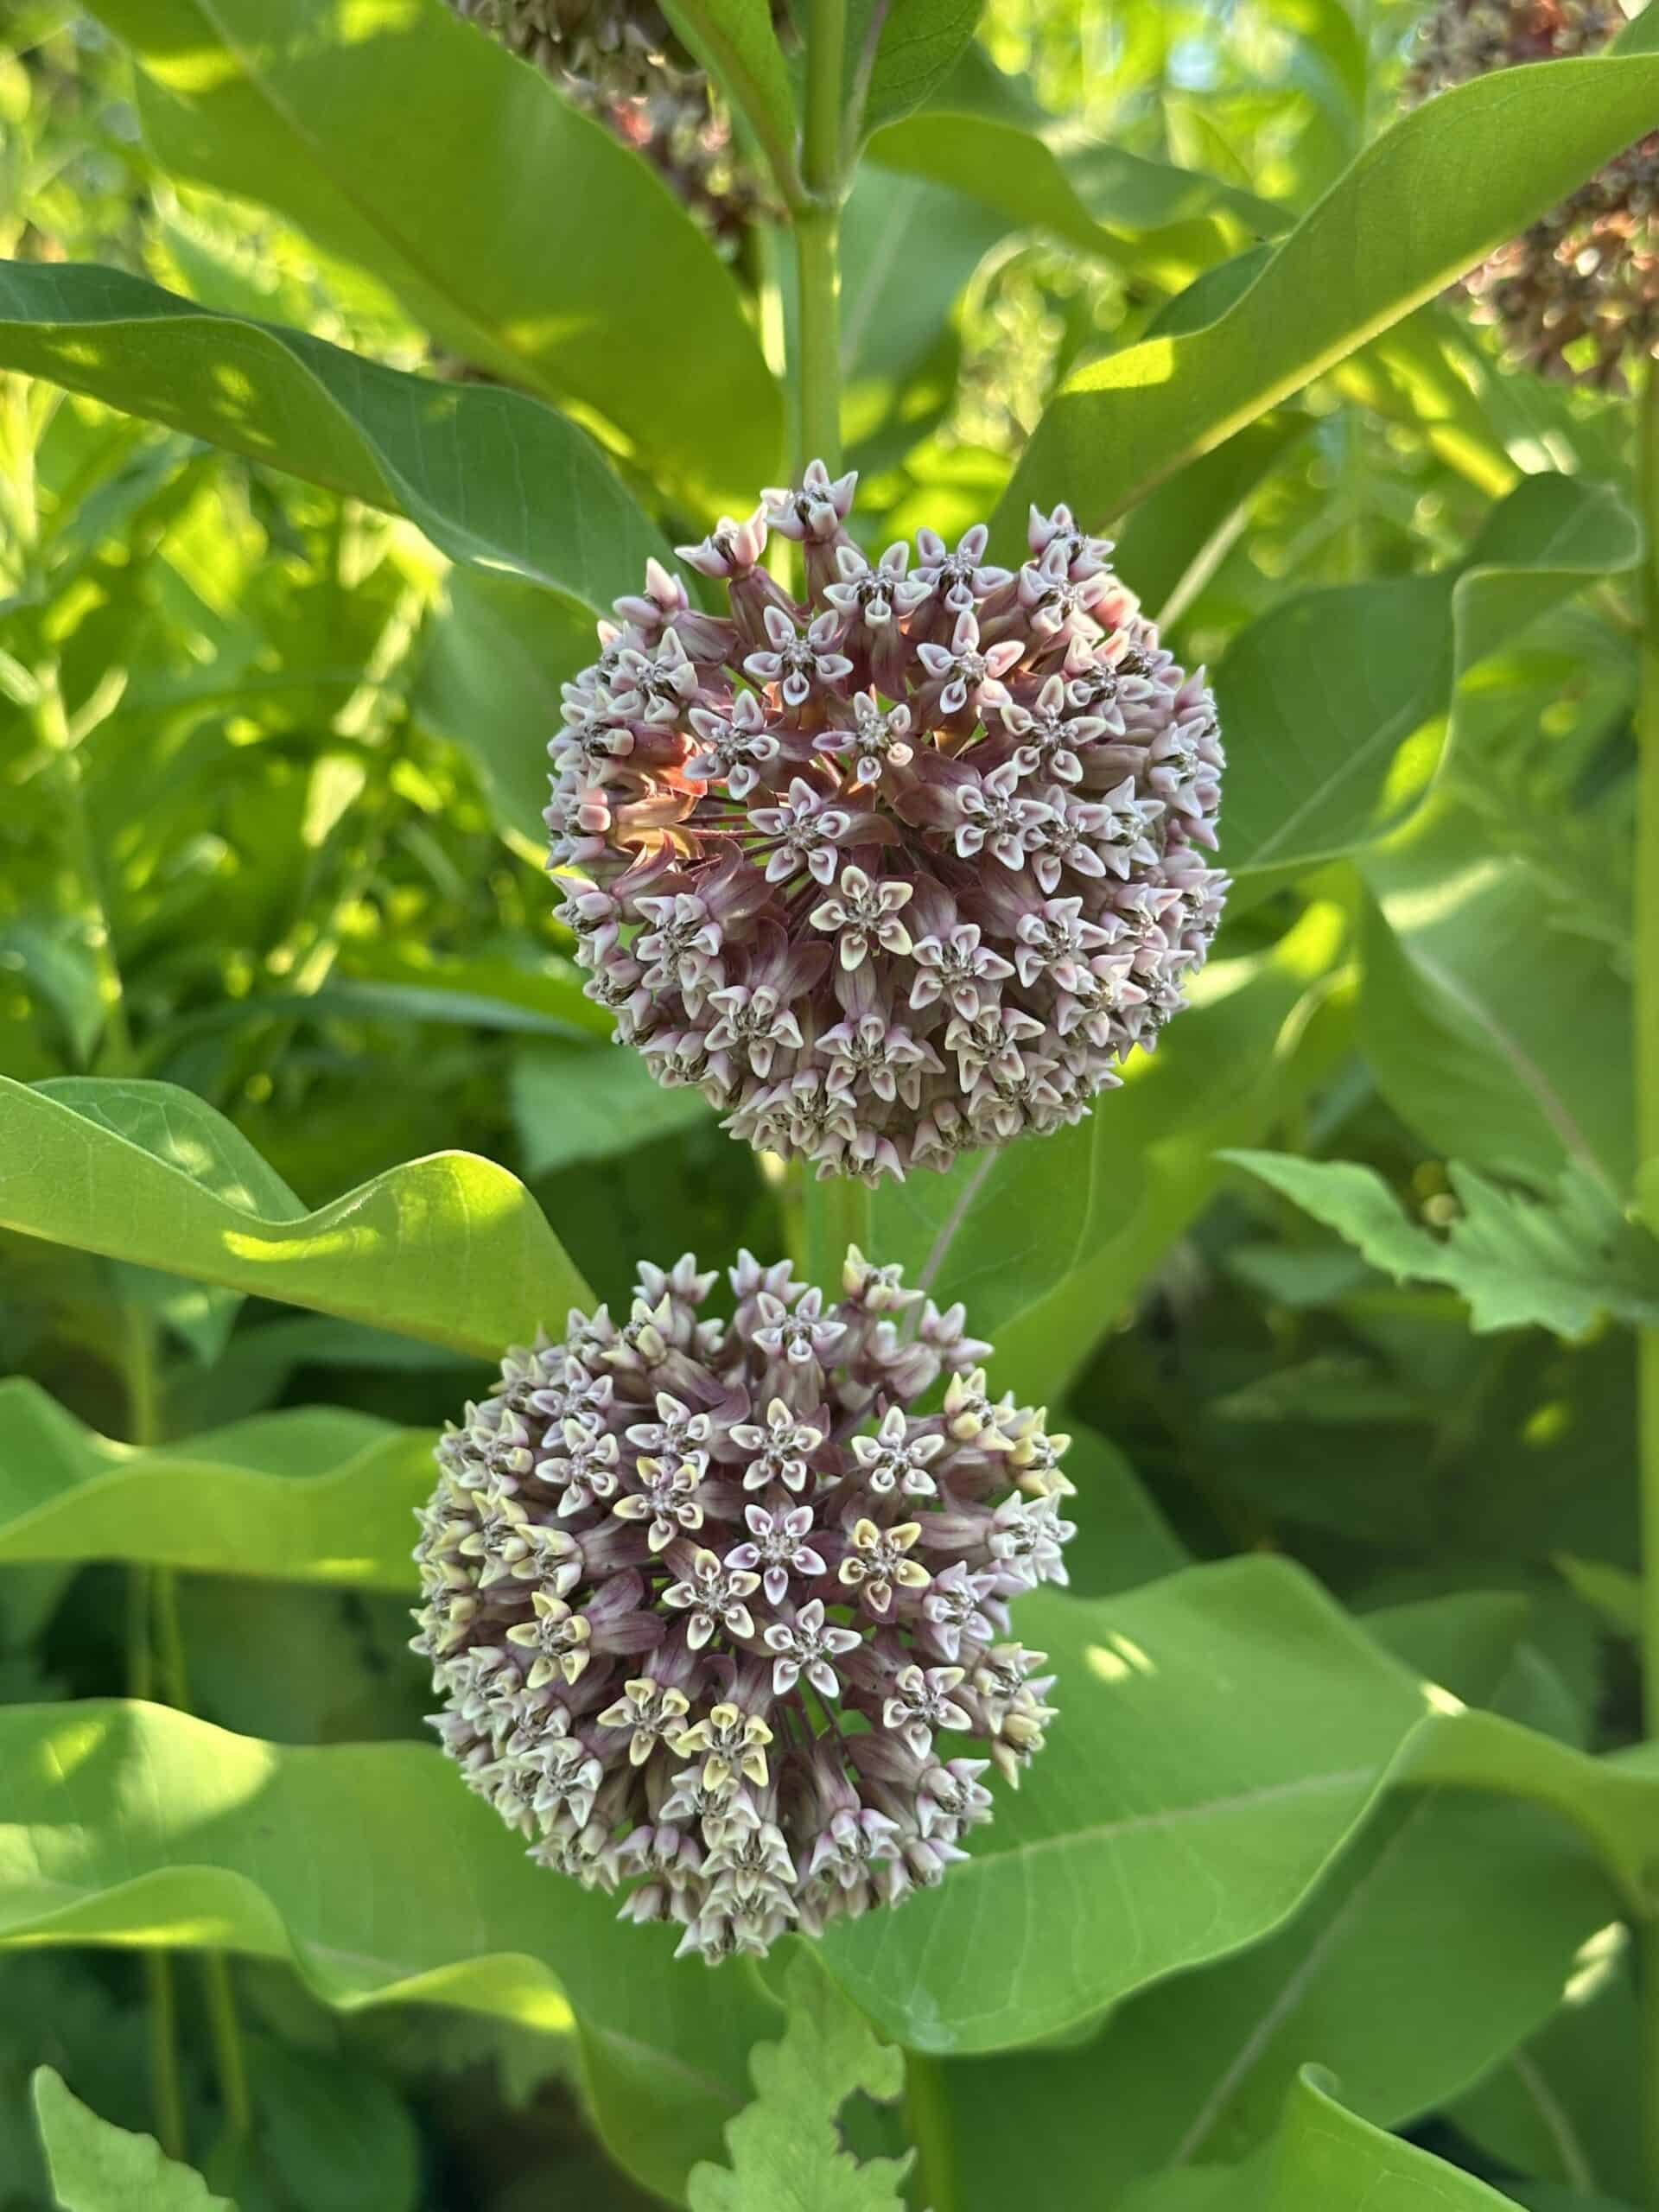 Ball-shaped clusters of pink flowers of milkweed.